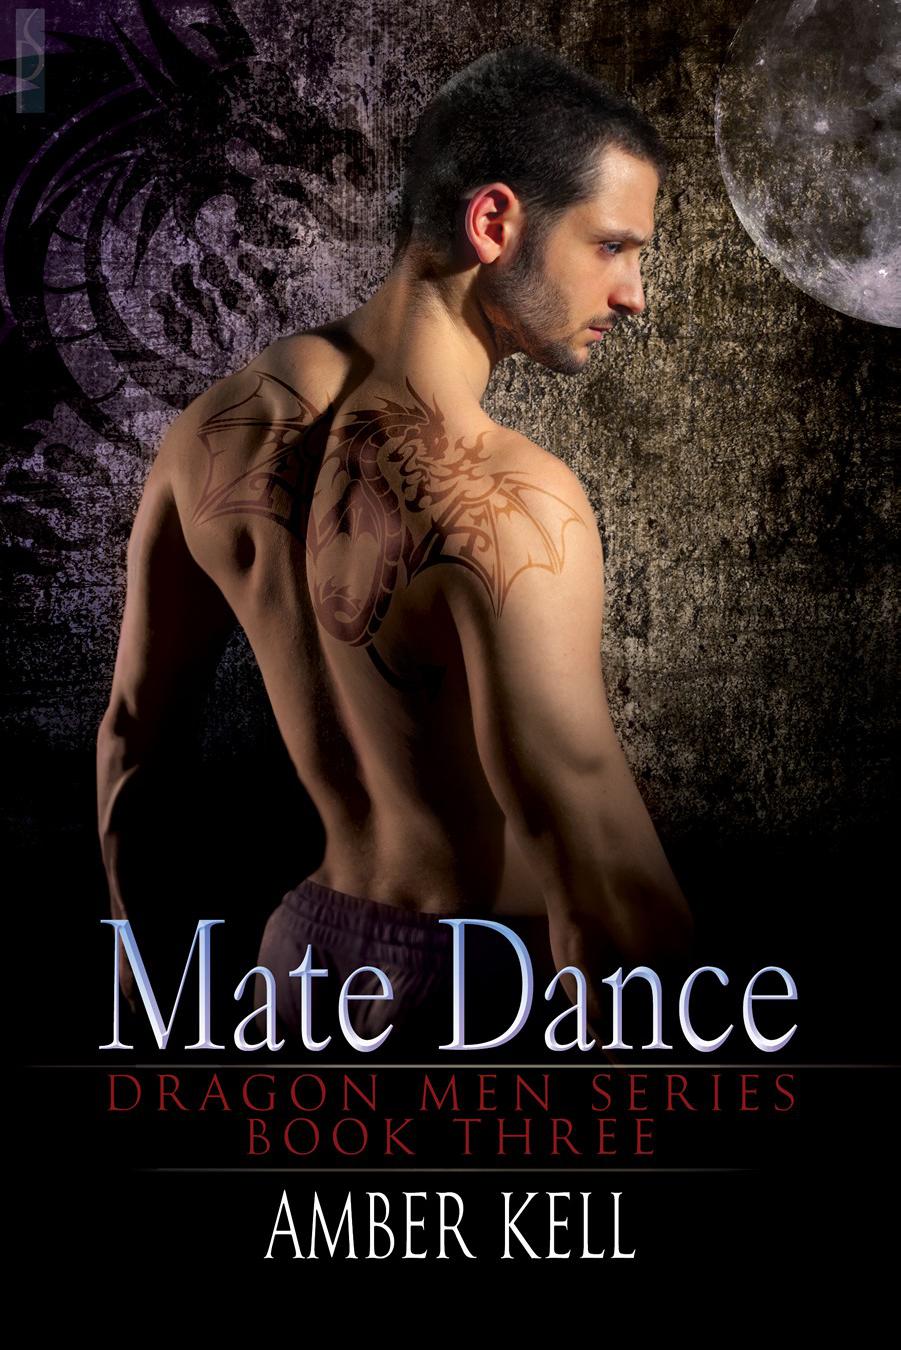 Mate Dance by Amber Kell